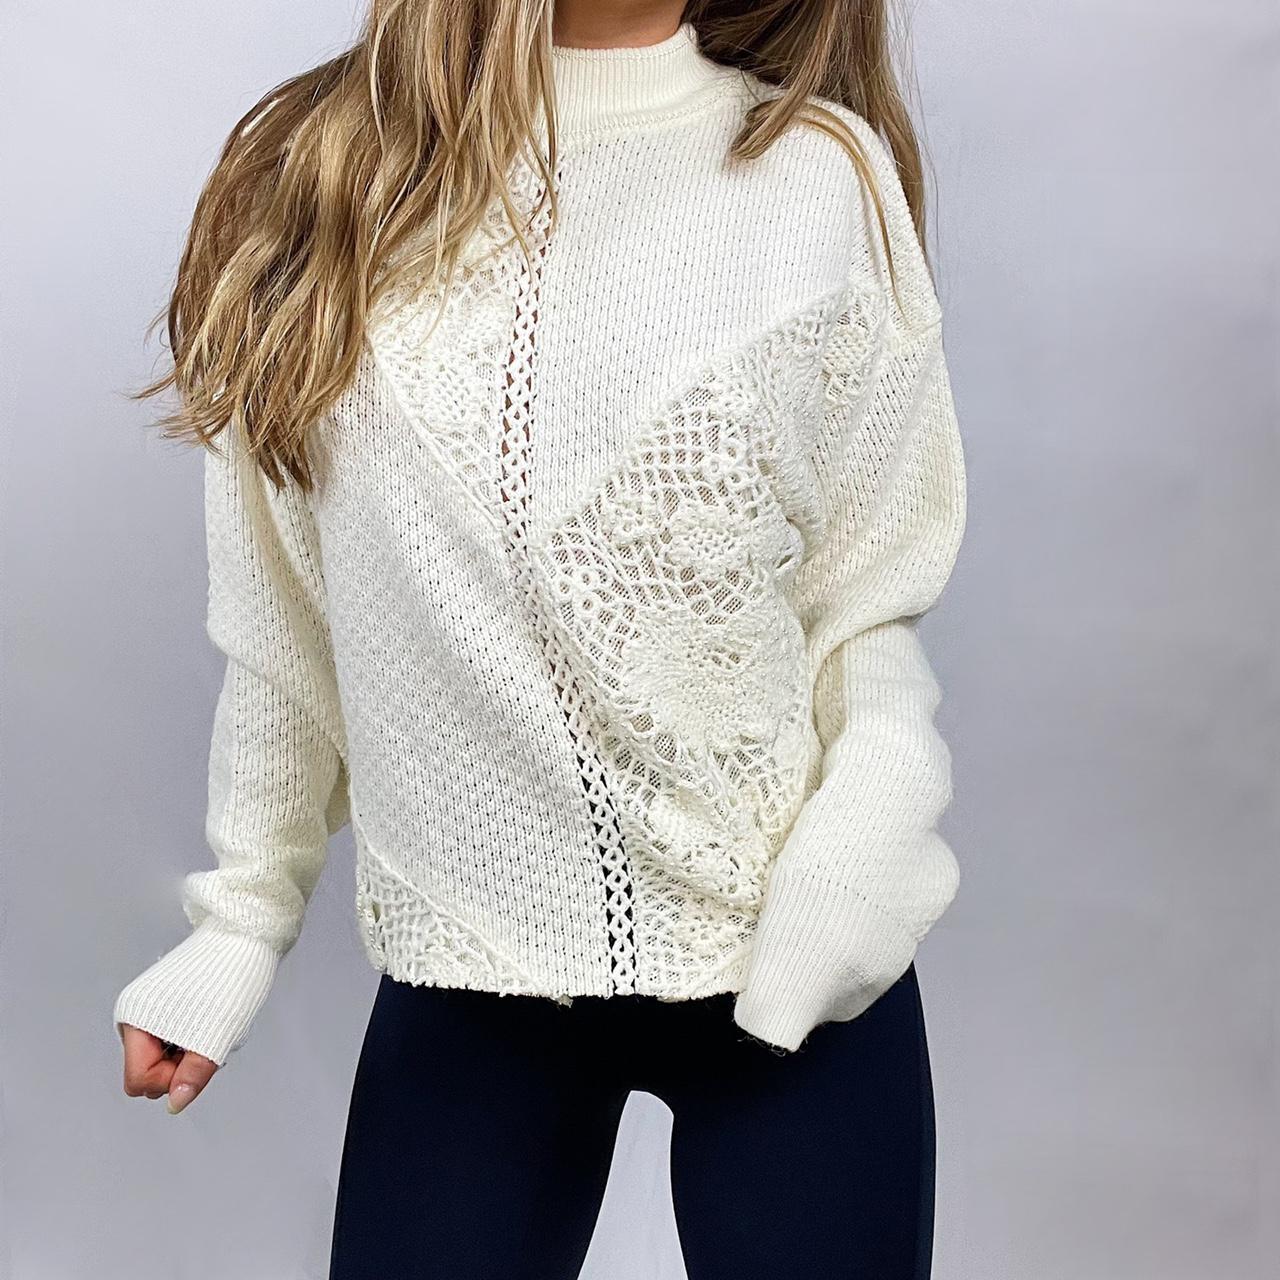 Product Image 1 - vintage beaded sweater 🪡

this mock